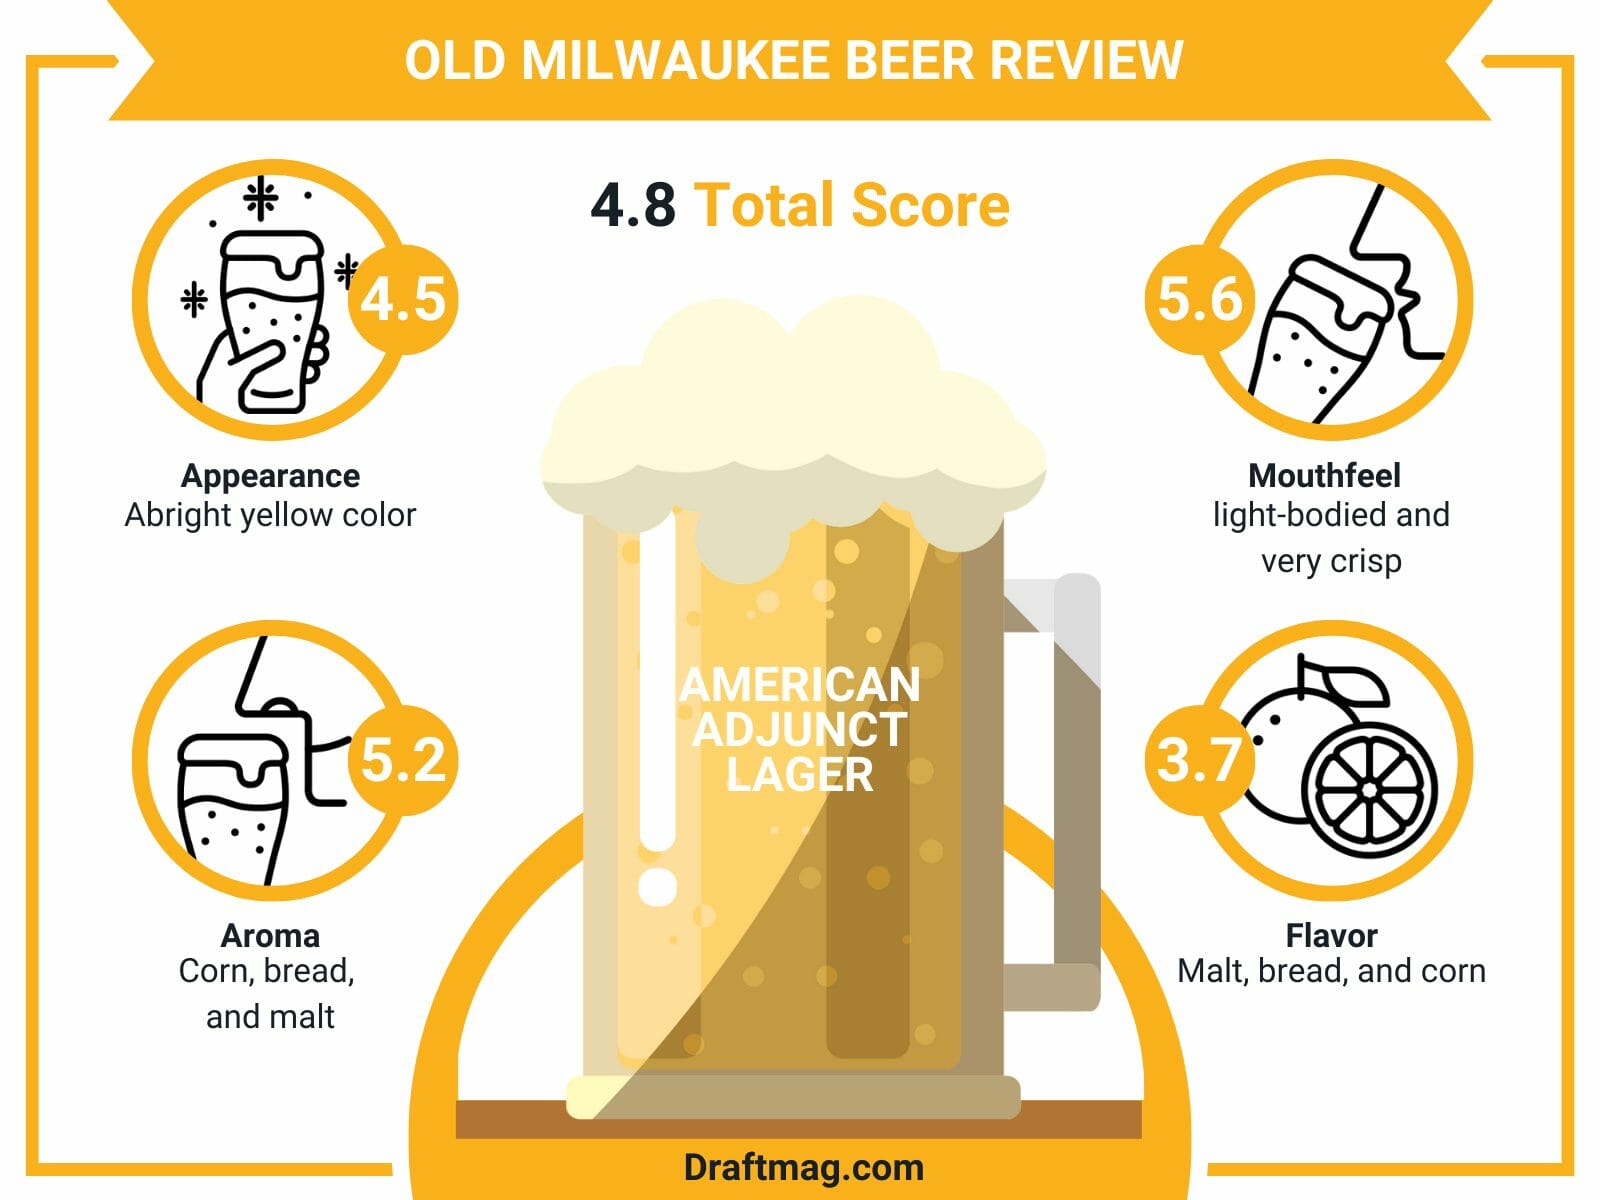 Old milwaukee beer review infographic